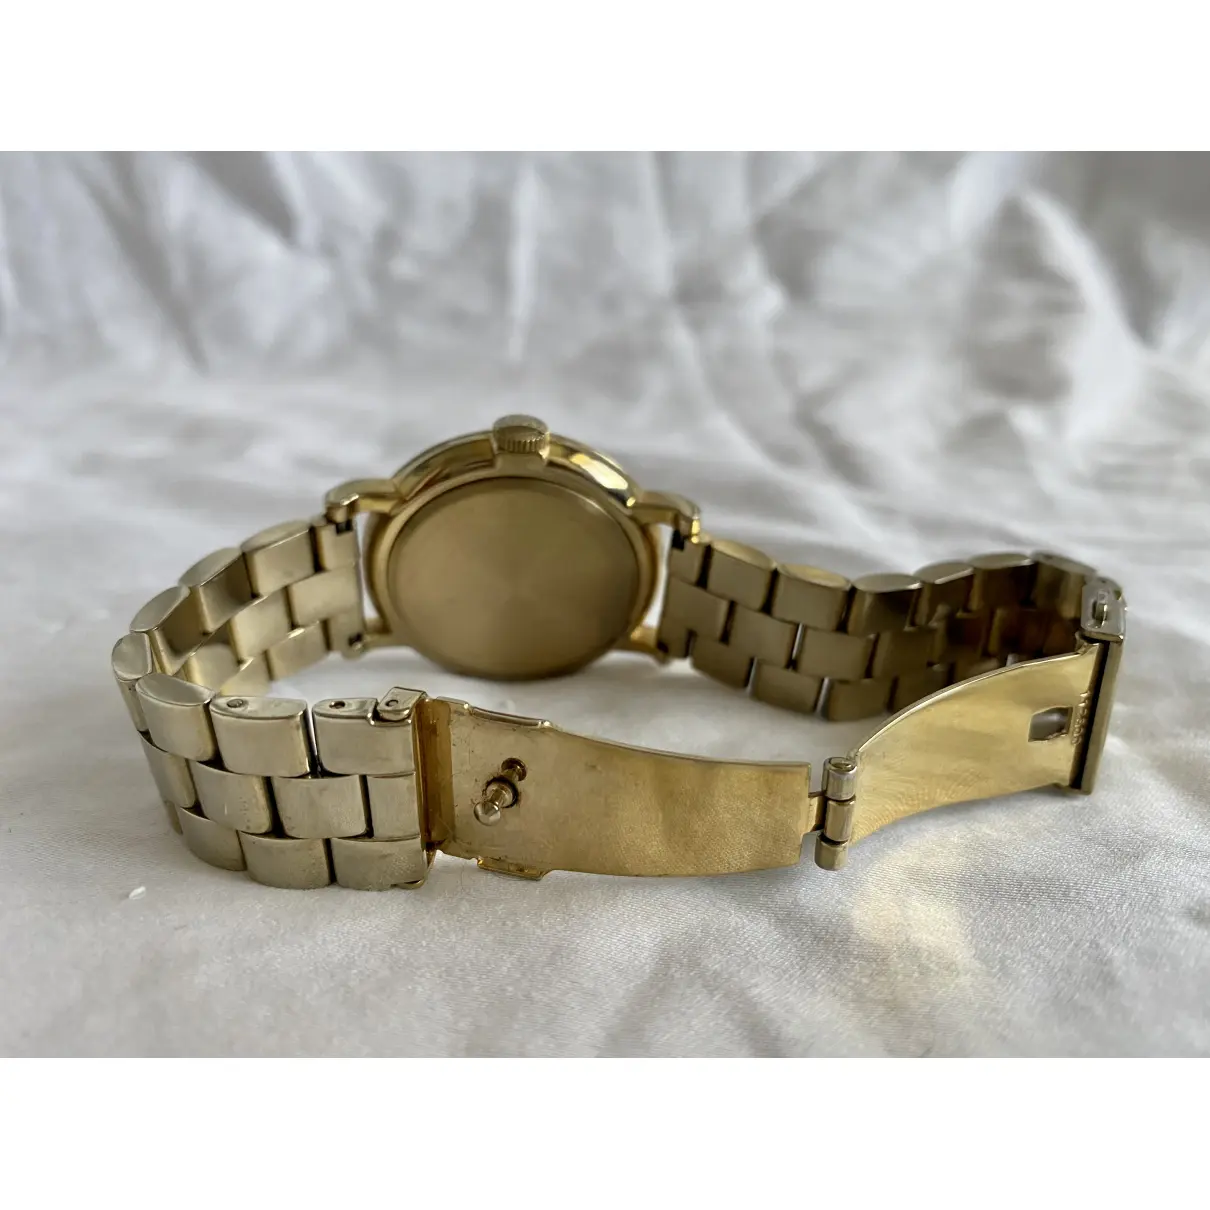 Buy Marc by Marc Jacobs Yellow gold watch online